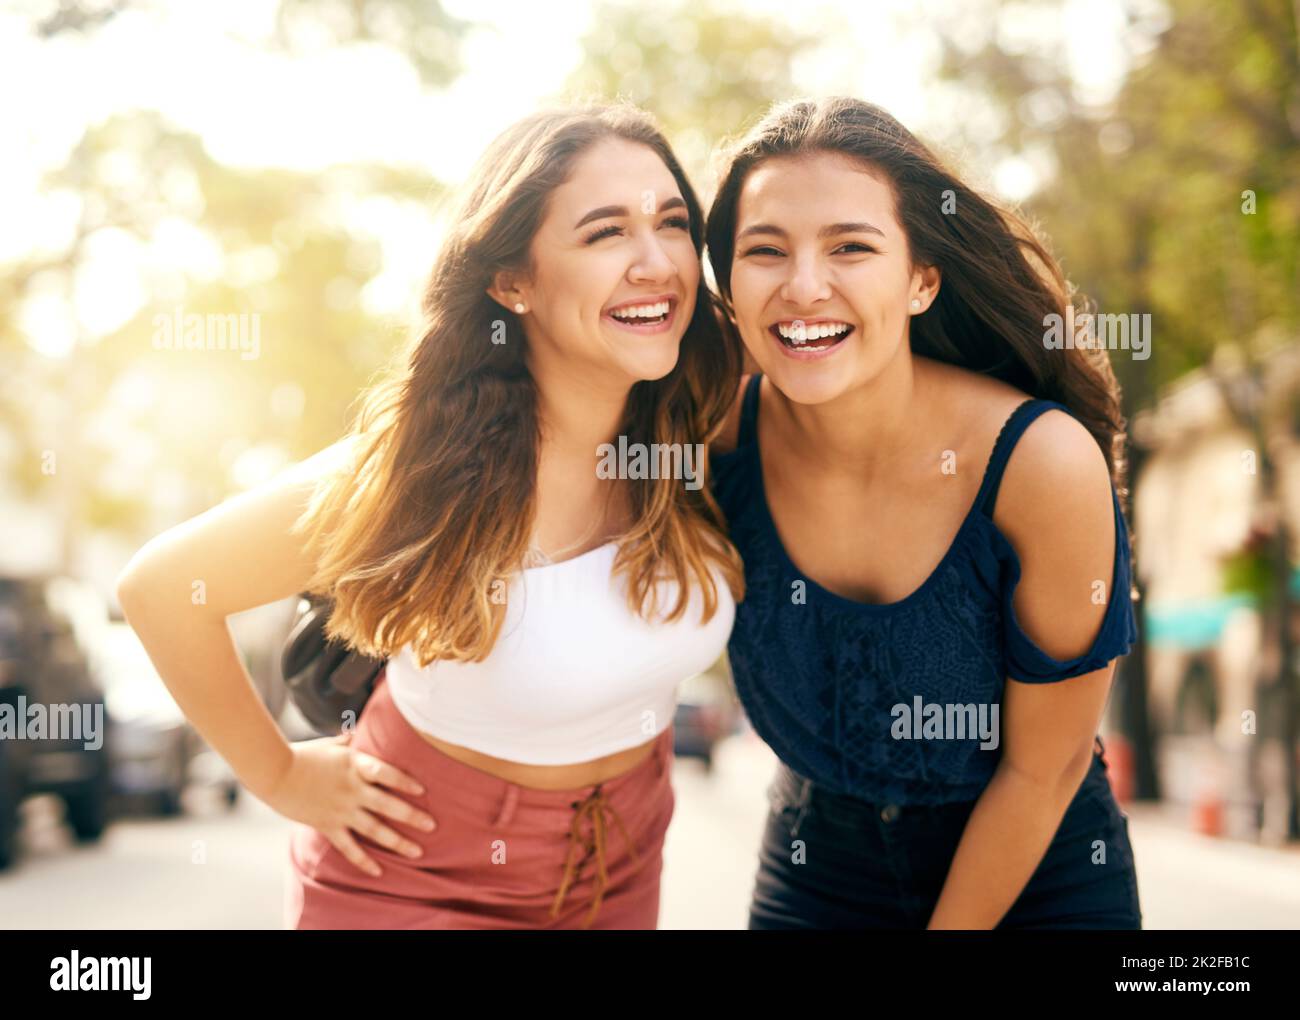 Live, love and laugh with your best friend. Portrait of two female best friends spending the day together in the city. Stock Photo